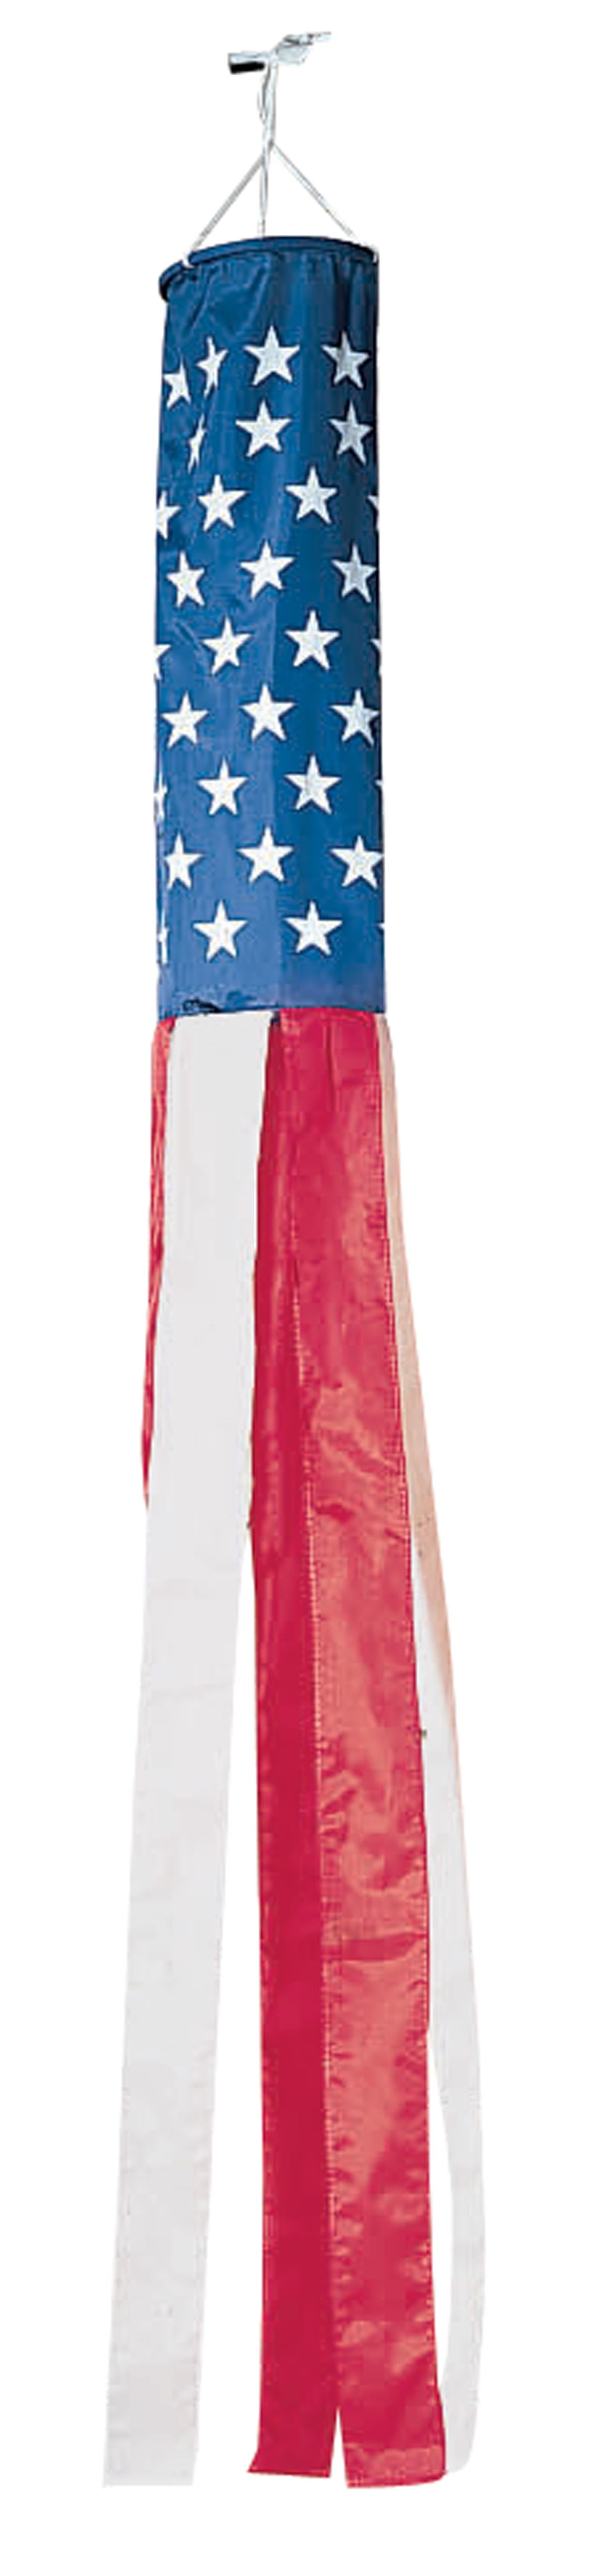 OUTOUR Cute Windsock Wind Sock 51 Inch The Star-Spangled Anner Sock Uncle Sam Fourth of July American USA Independence Day Decoration 4th of July Patriotic Party for Garden Patio Lawn Backyard 